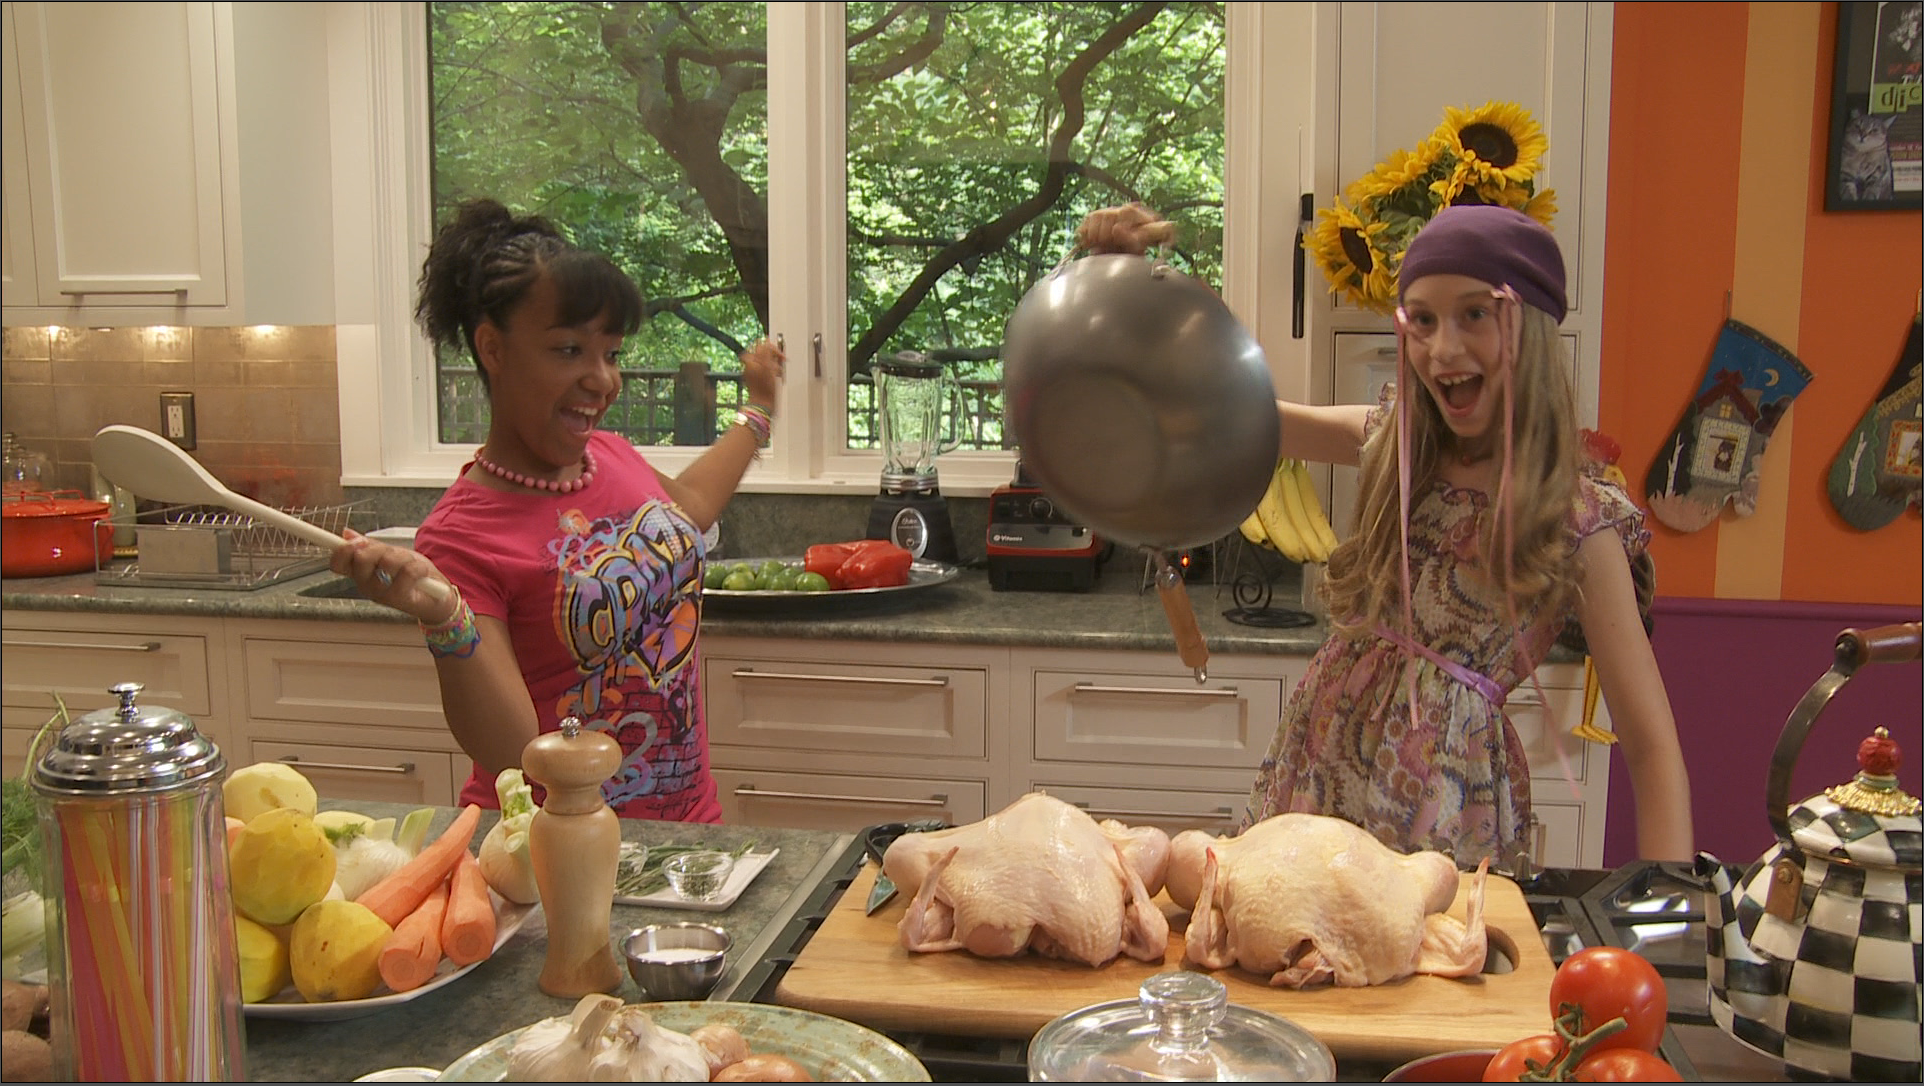 KickinKitchen.TV, a Hip New Cooking TV Series and Interactive Website for  Tweens and Teens! | FoodDayMA